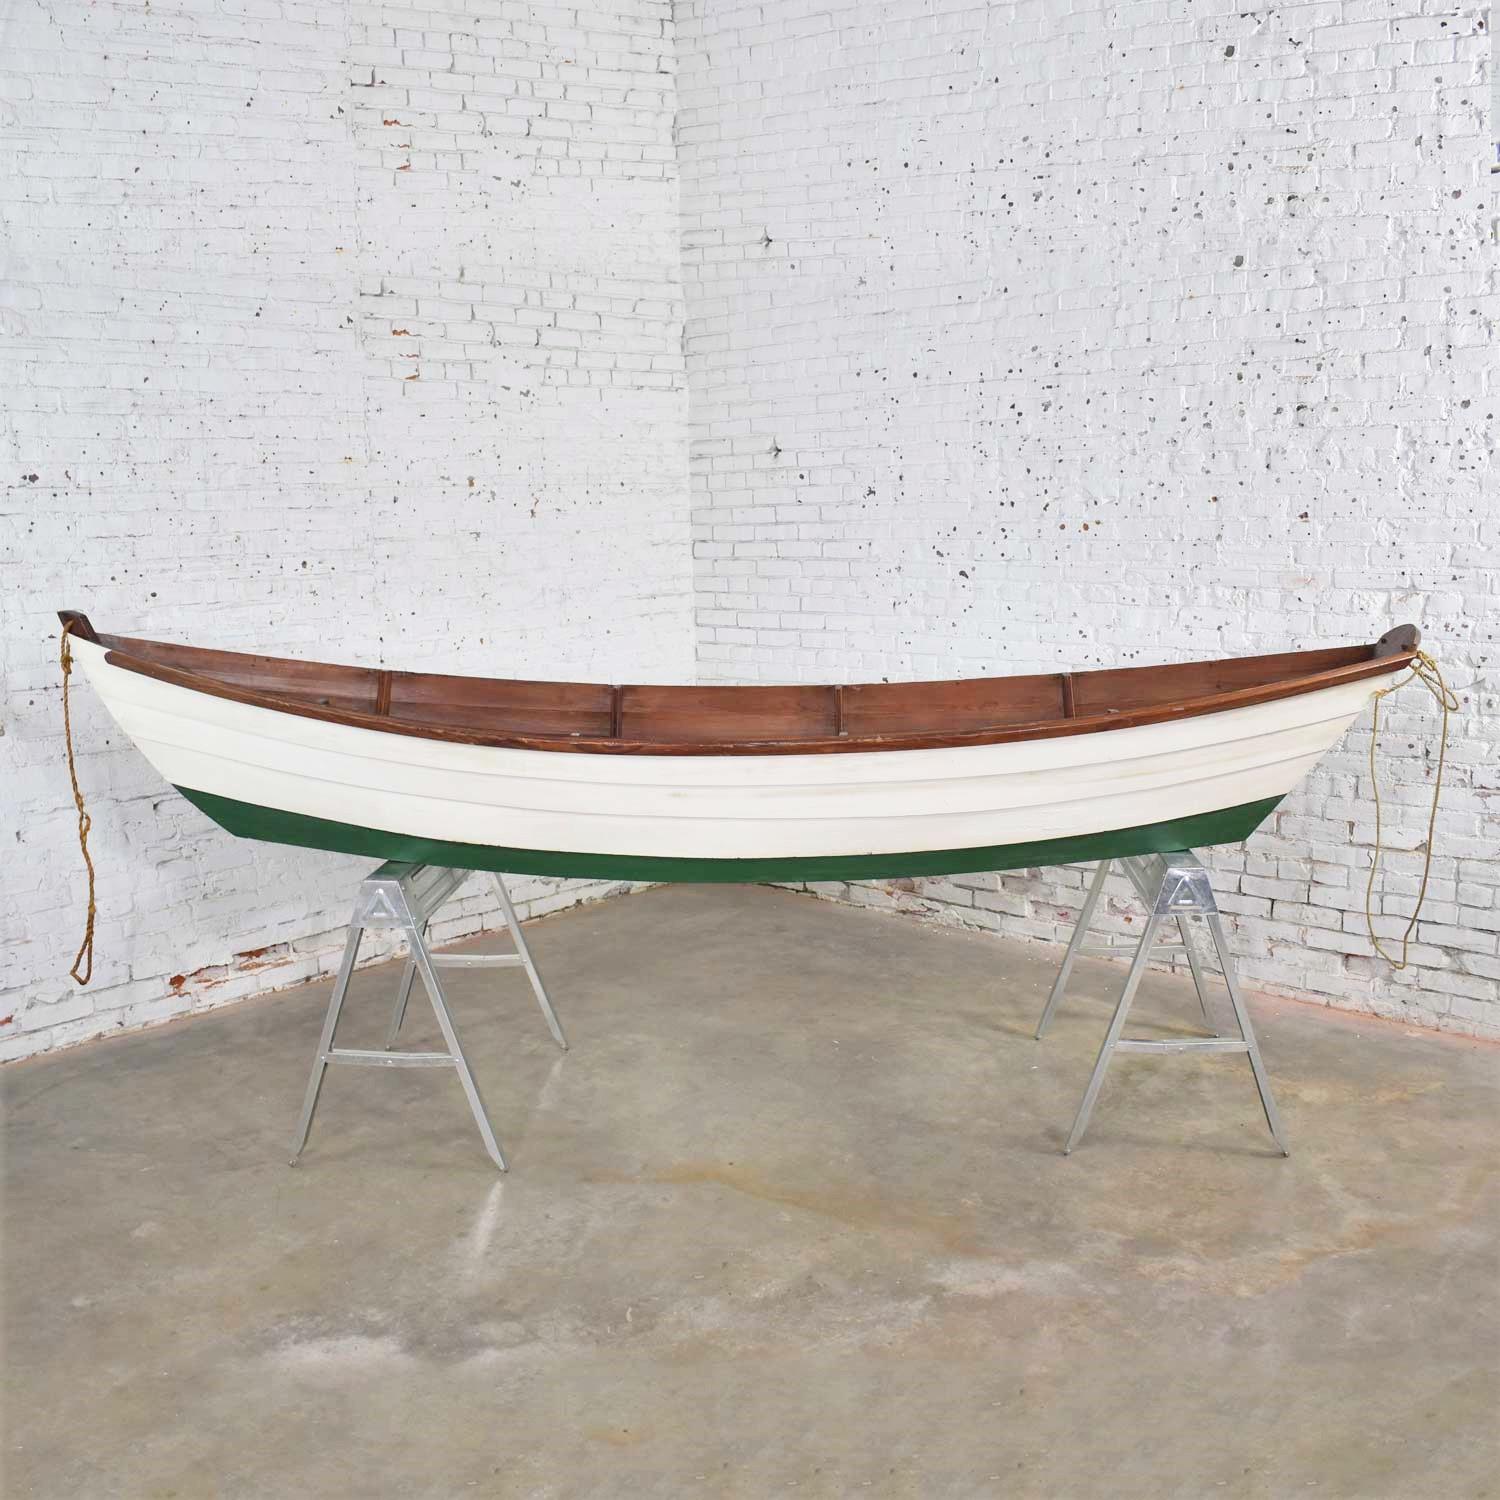 Vintage Wooden Rowboat for Maritime or Nautical Décor 4